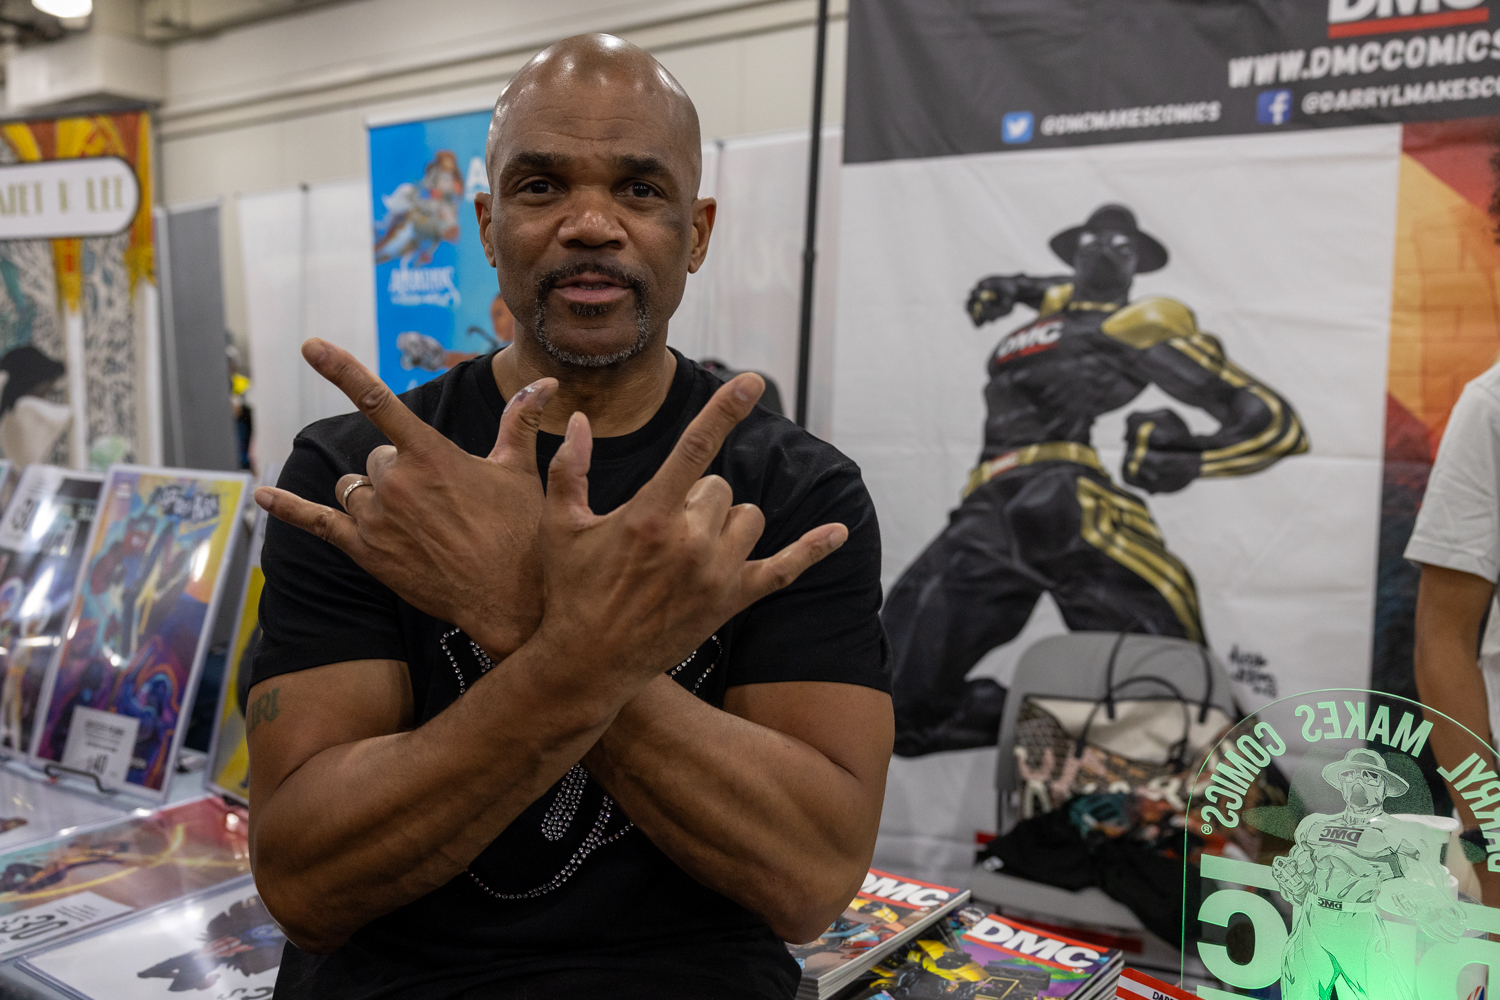 Darryl McDaniels (Run DMC) poses in front of a Run DMC booth filled with posters and merchandise.